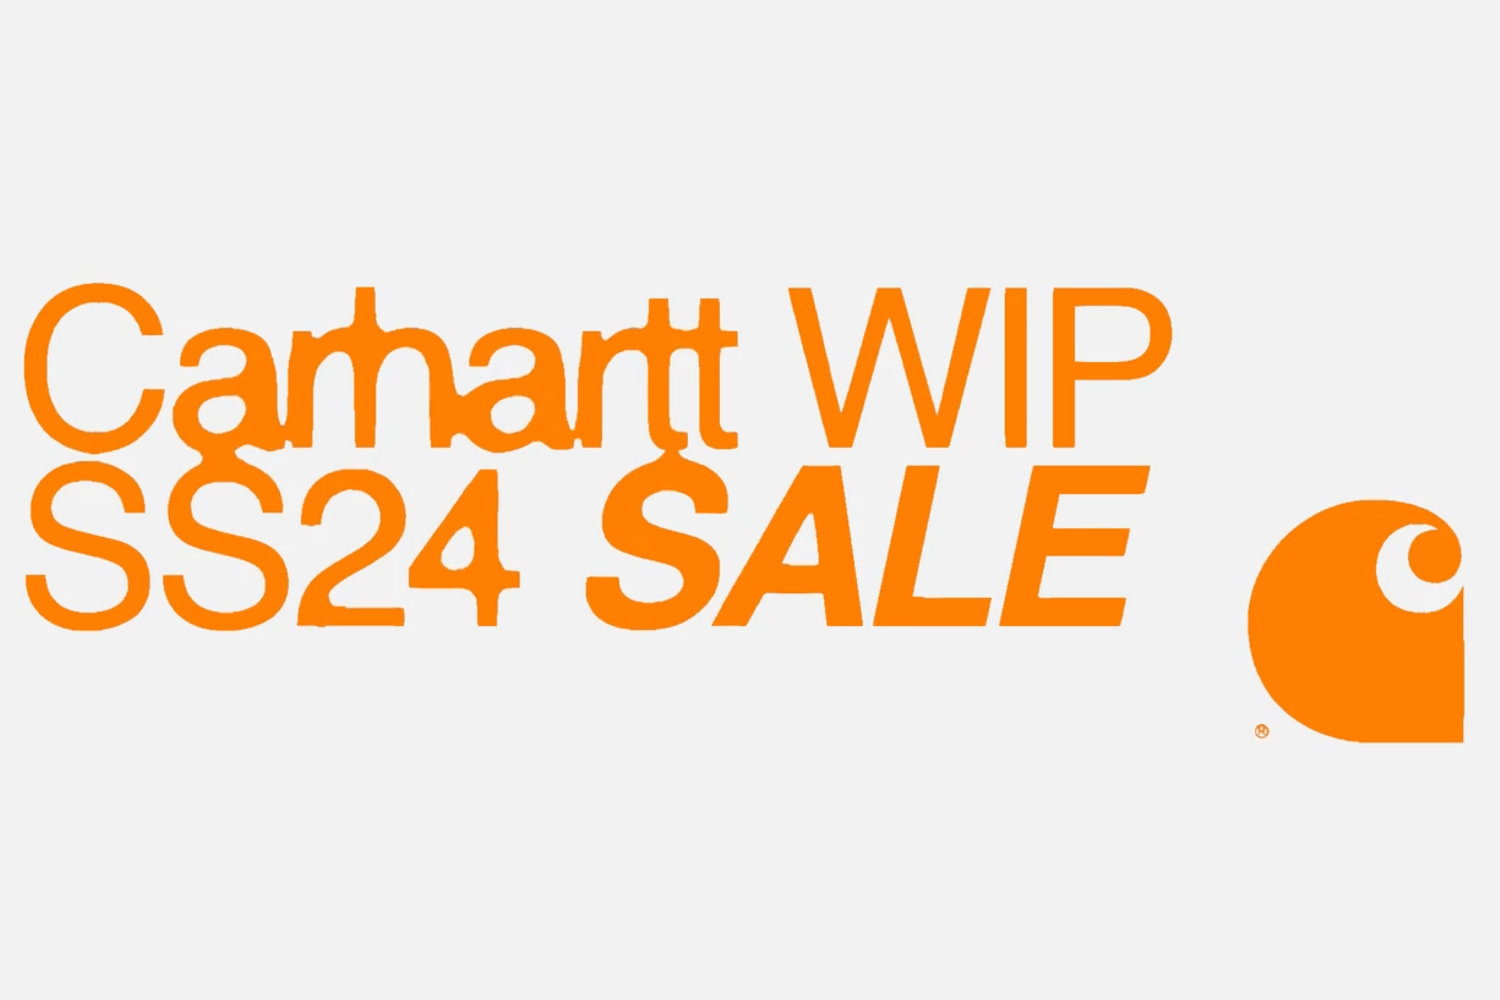 Save up to 50% off in the Carhartt WIP SS24 Sale